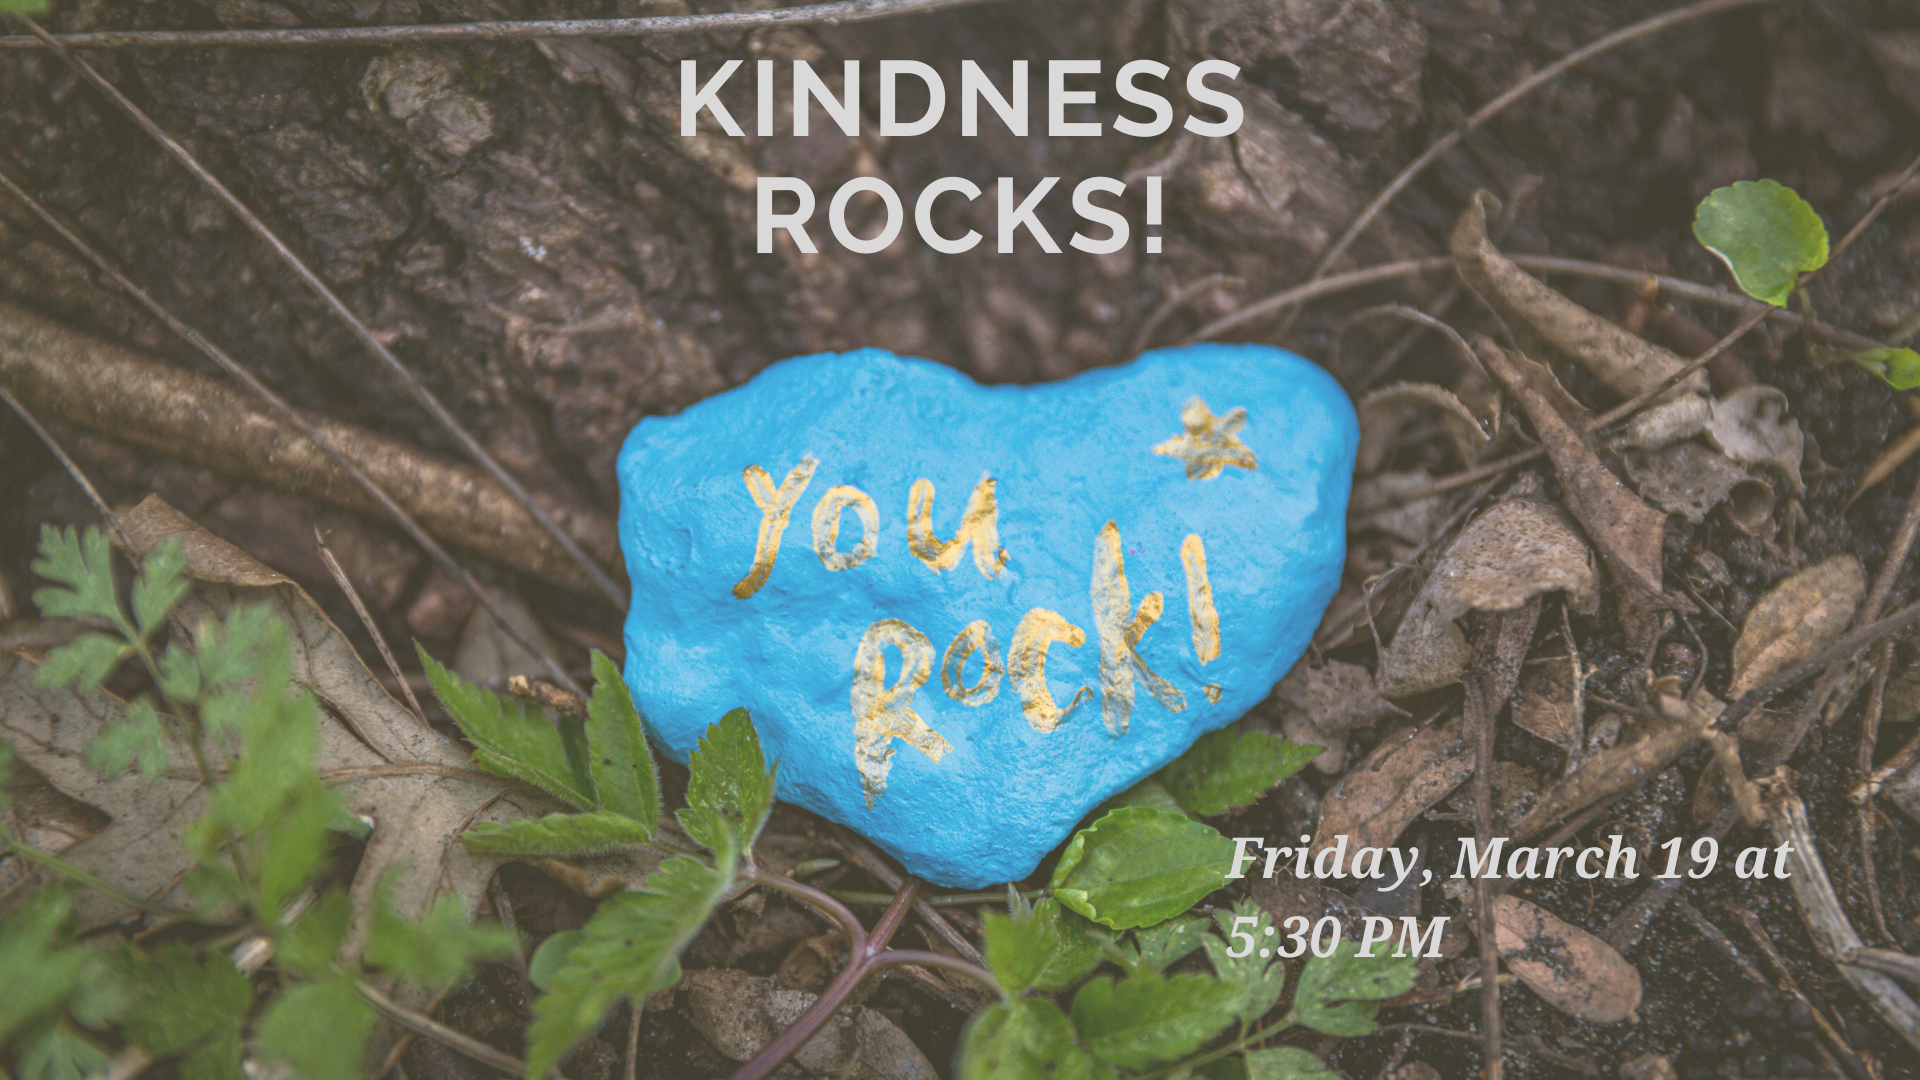 A rock with "You Rock!" painted on it.